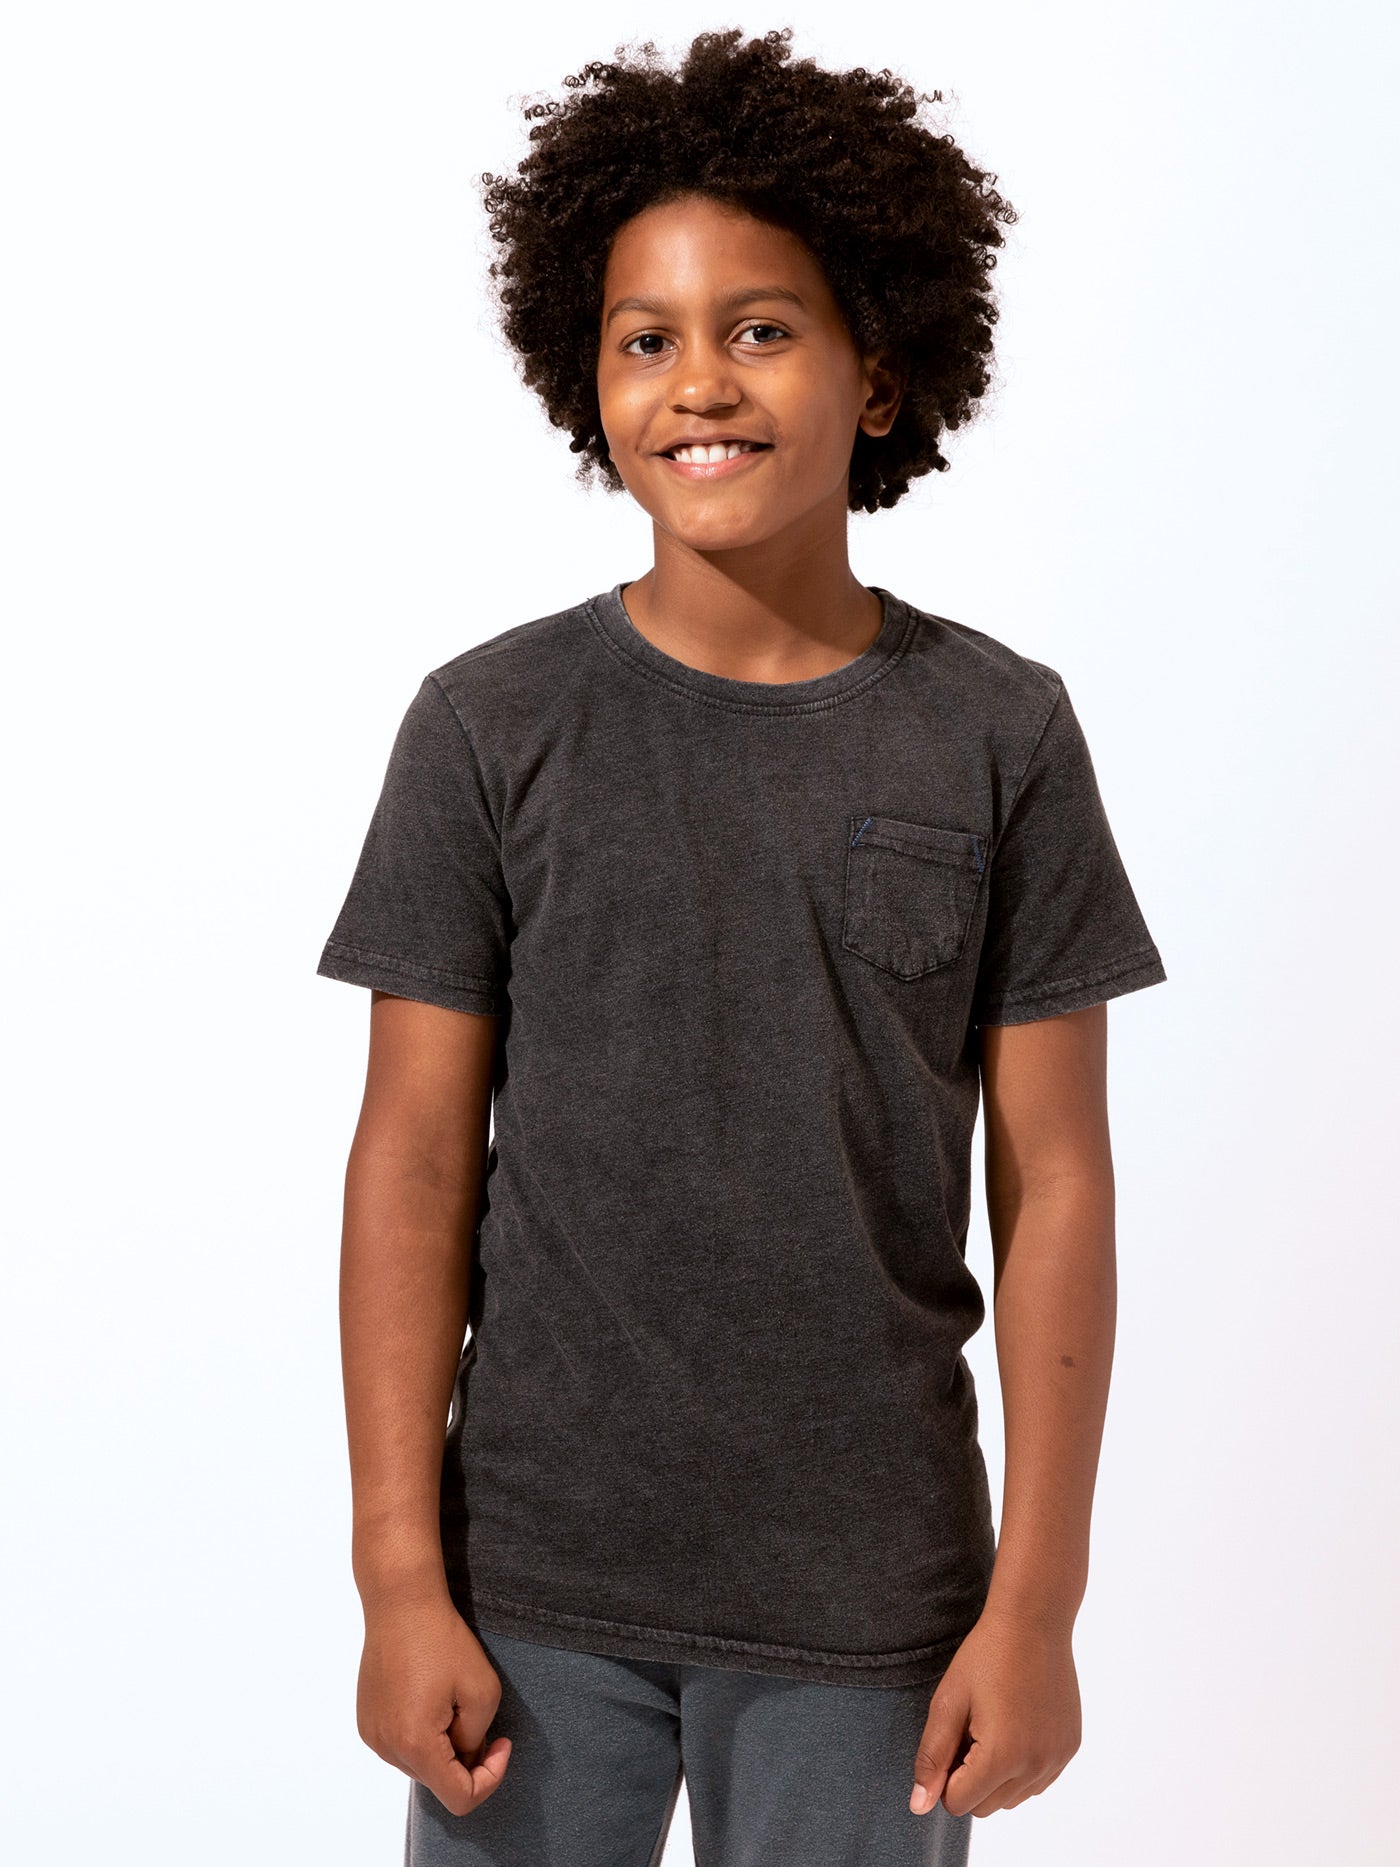 Boy's Mineral Wash Pocket Tee Boys Tops Tshirt Threads 4 Thought 